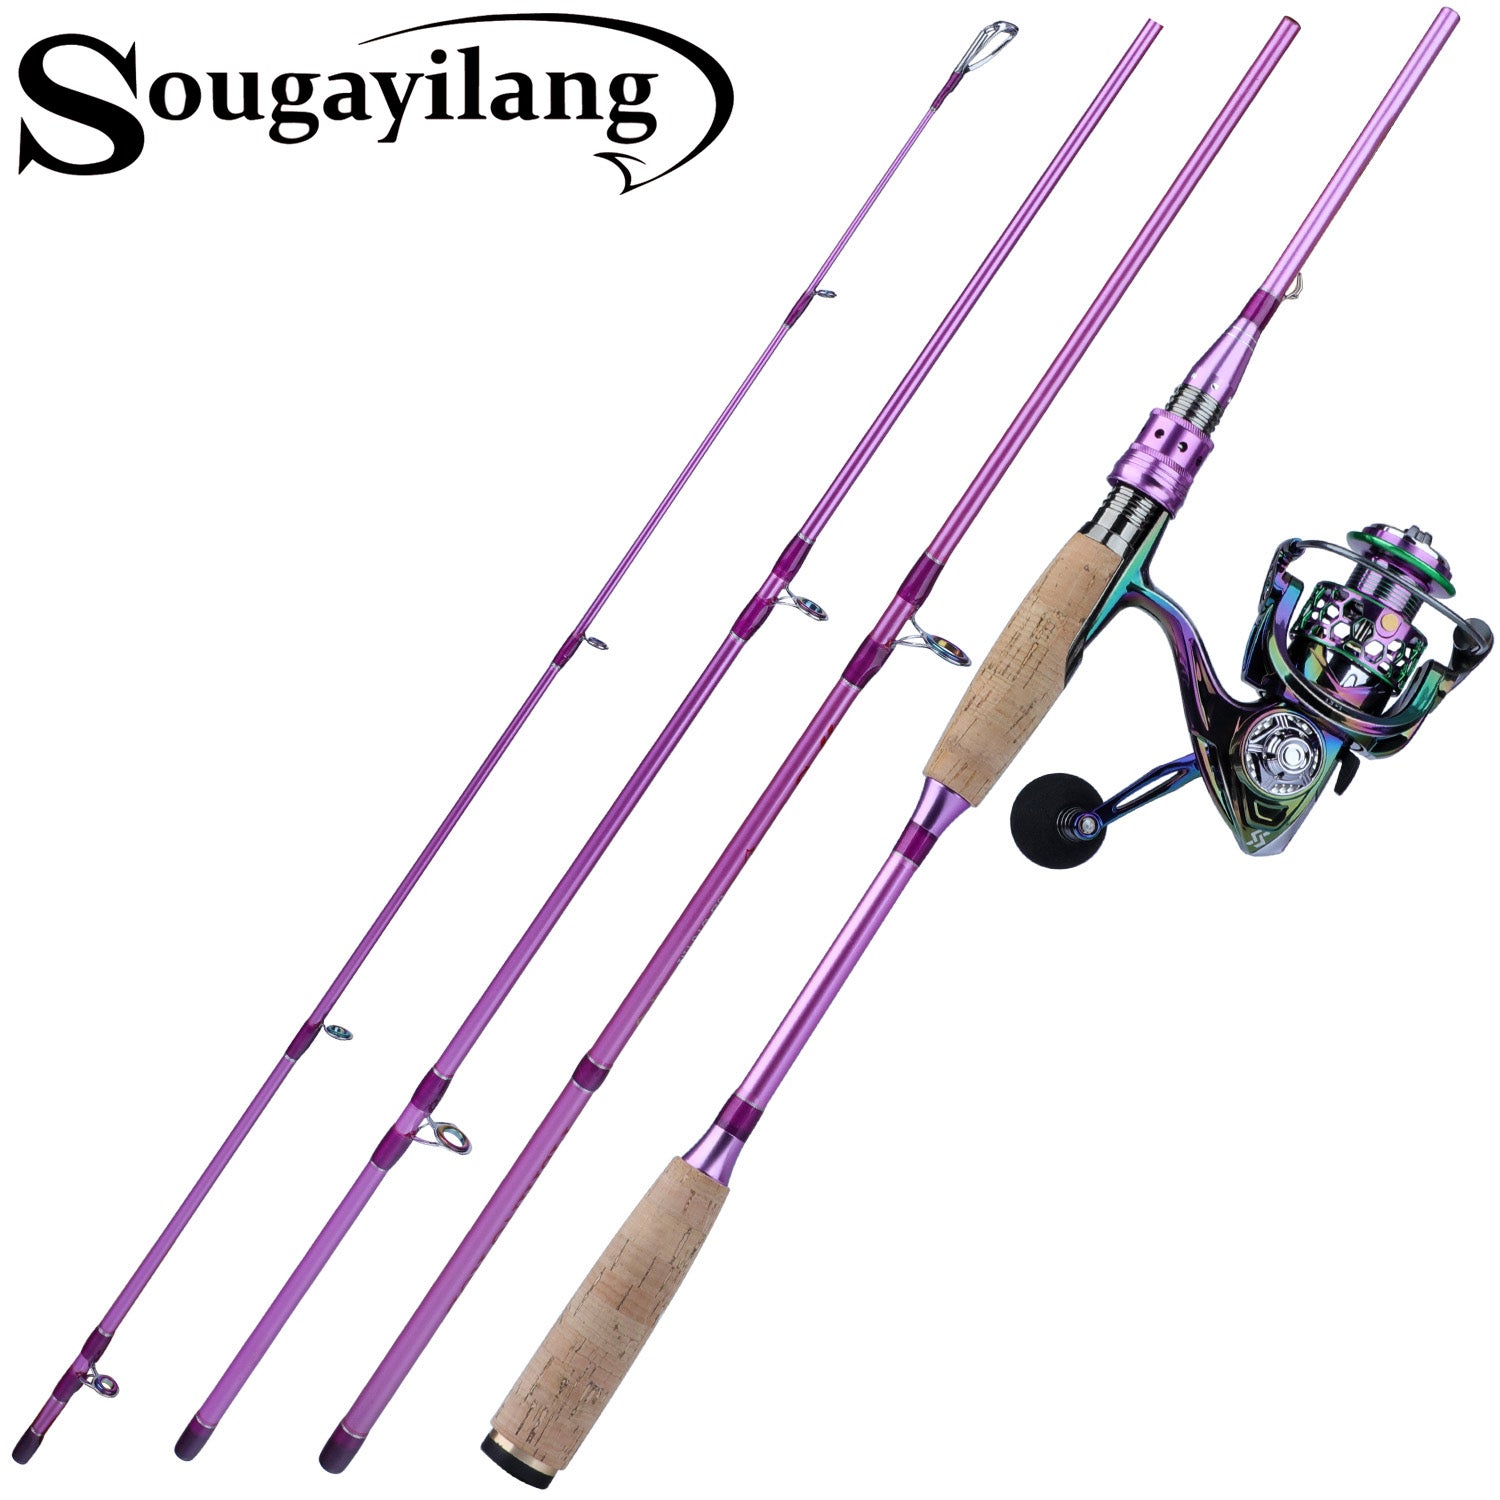 Shop Sougayilang Ultralight Fishing Set with great discounts and